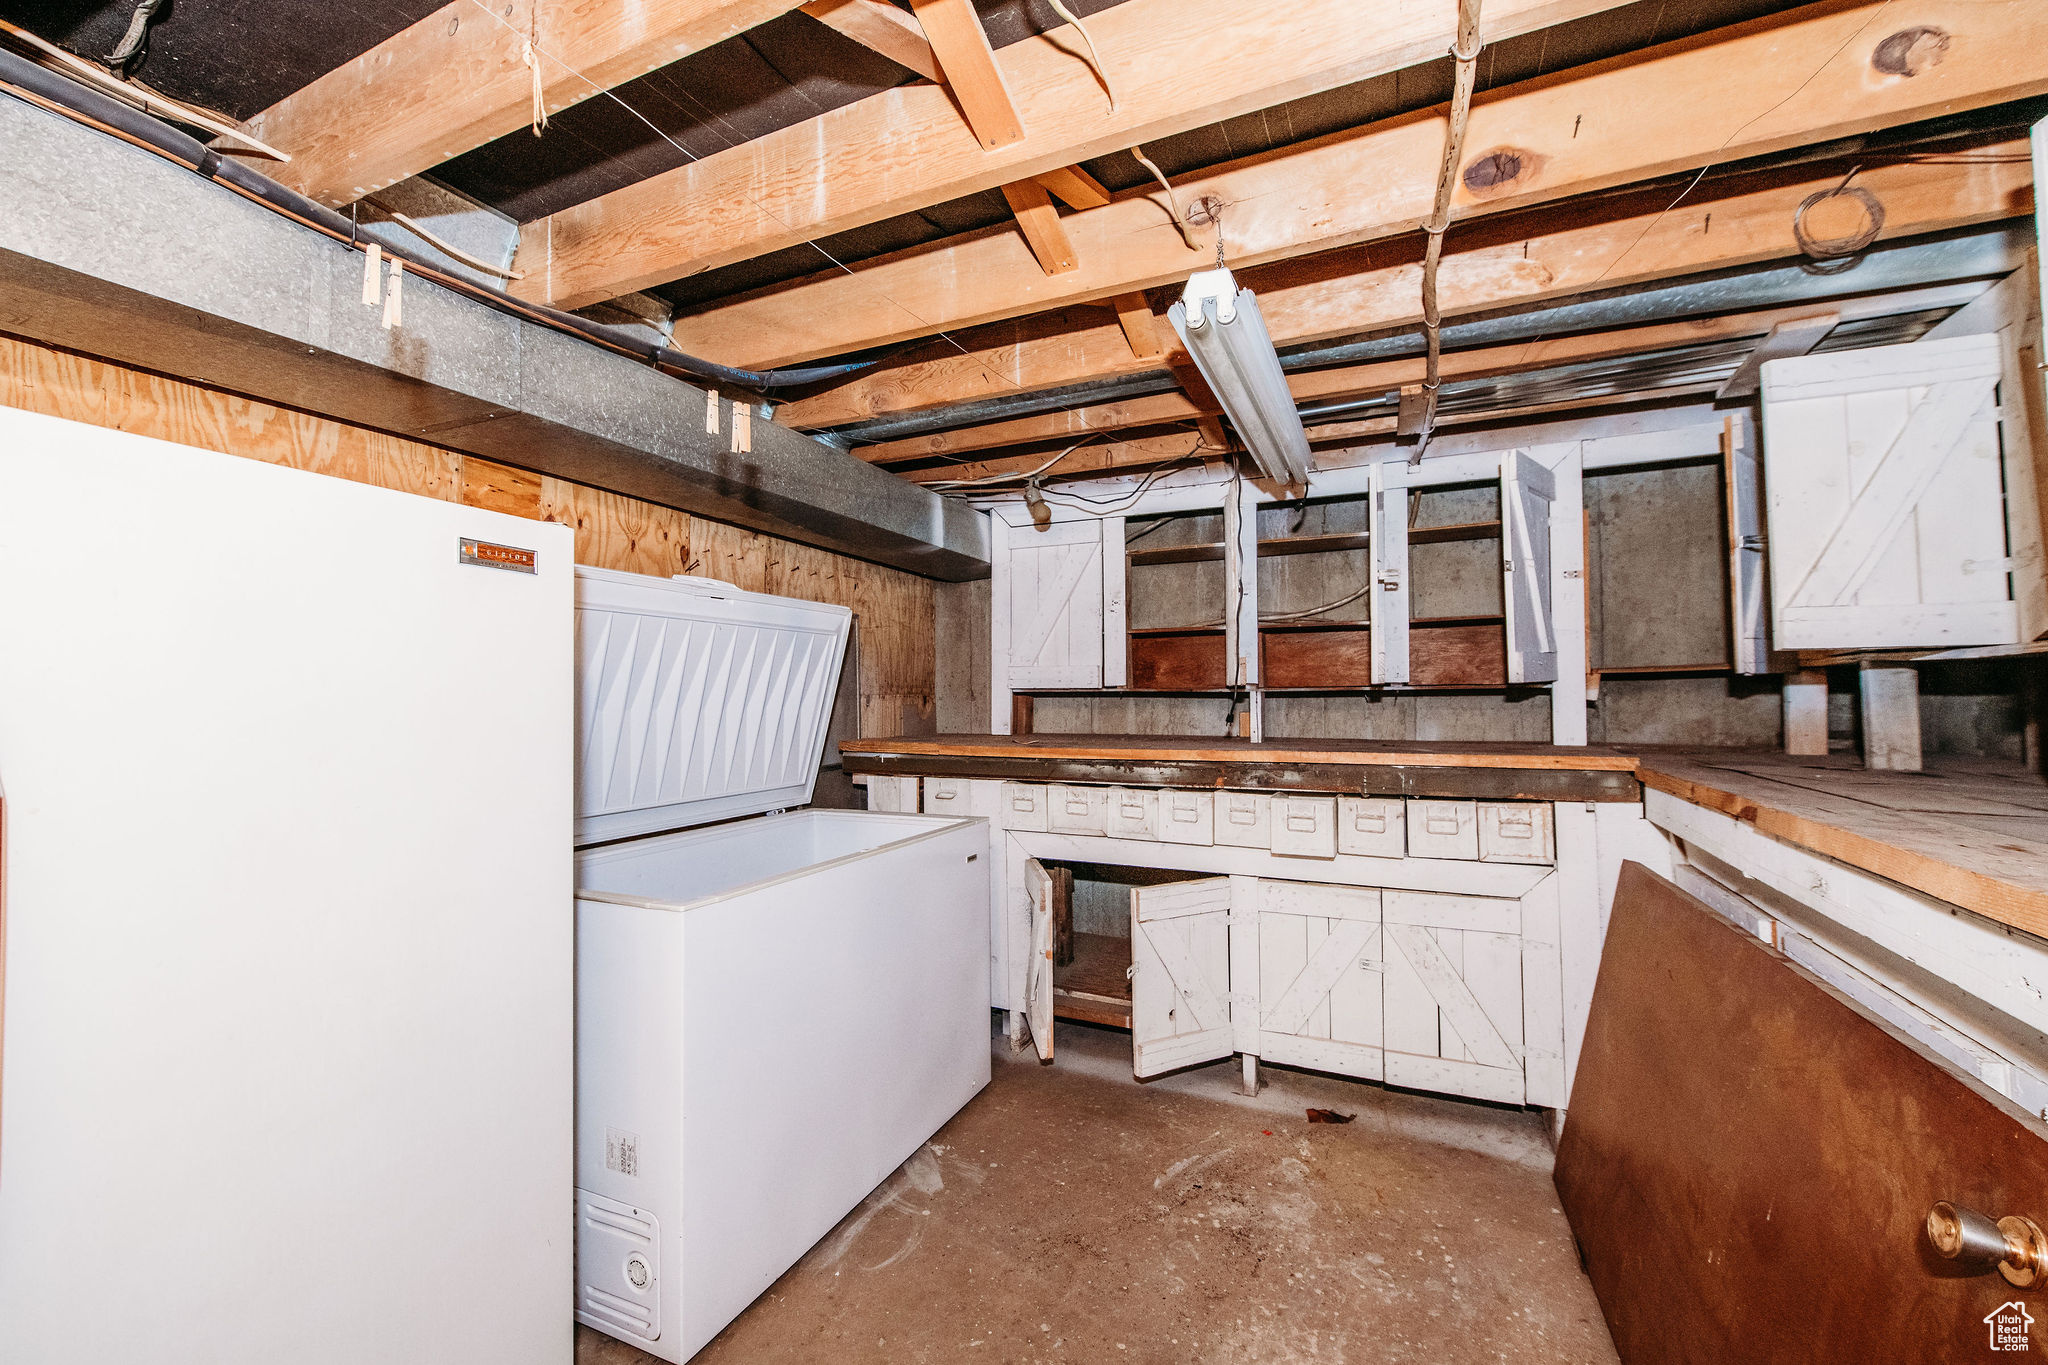 Laundry room with deep freezers and workshop